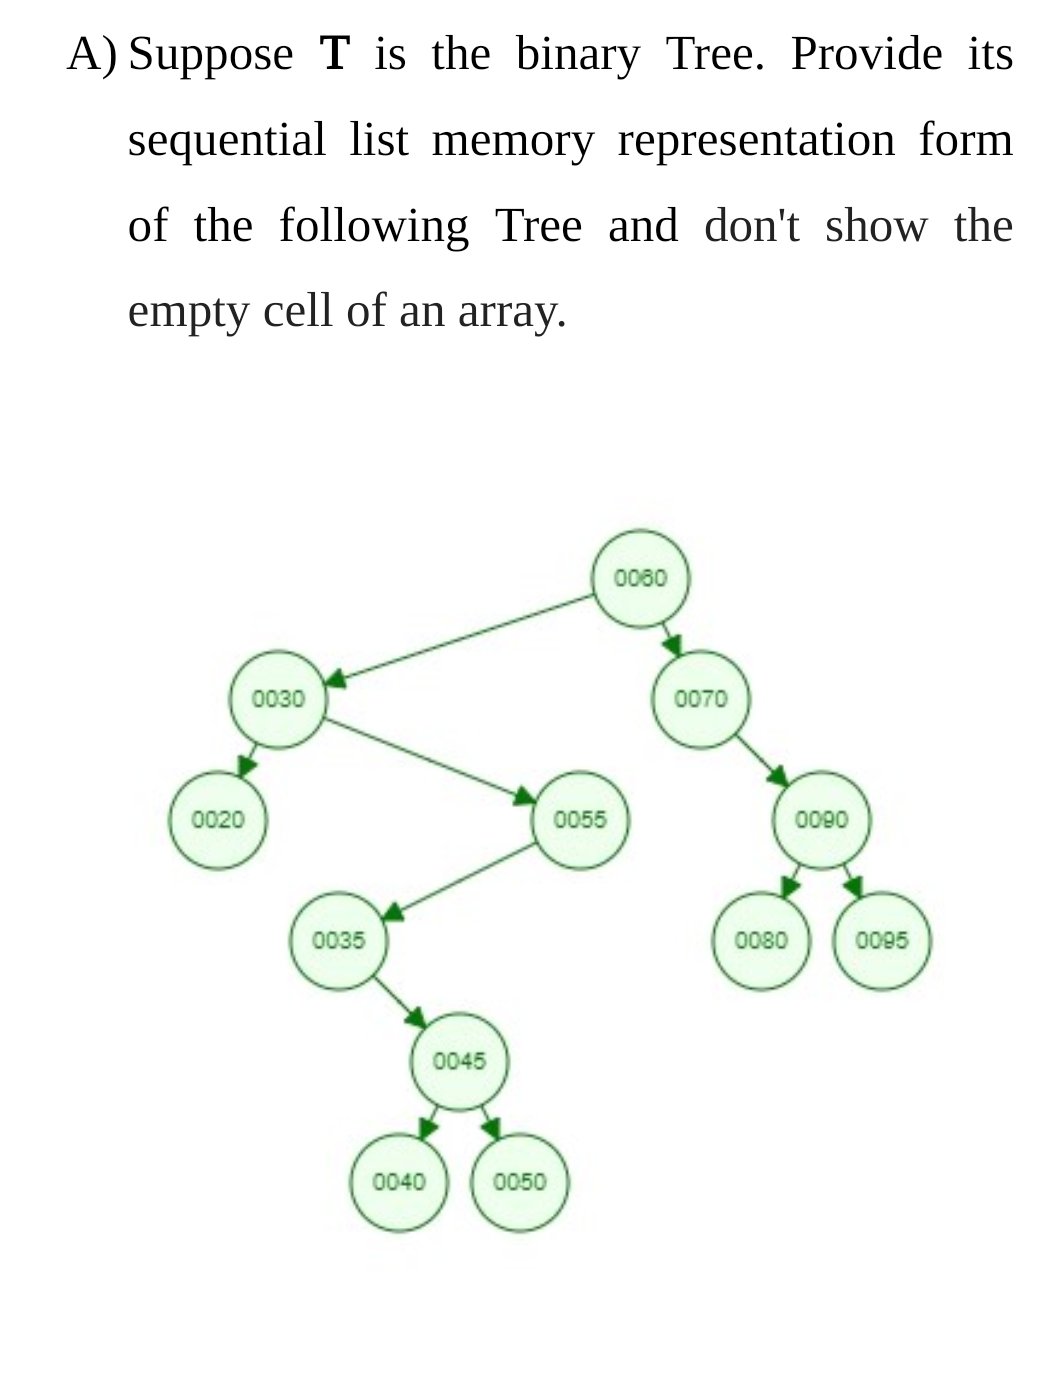 A) Suppose T is the binary Tree. Provide its
sequential list memory representation form
of the following Tree and don't show the
empty cell of an array.
0080
0030
0070
0020
0055
0090
0035
0080
0095
0045
0040
0050
